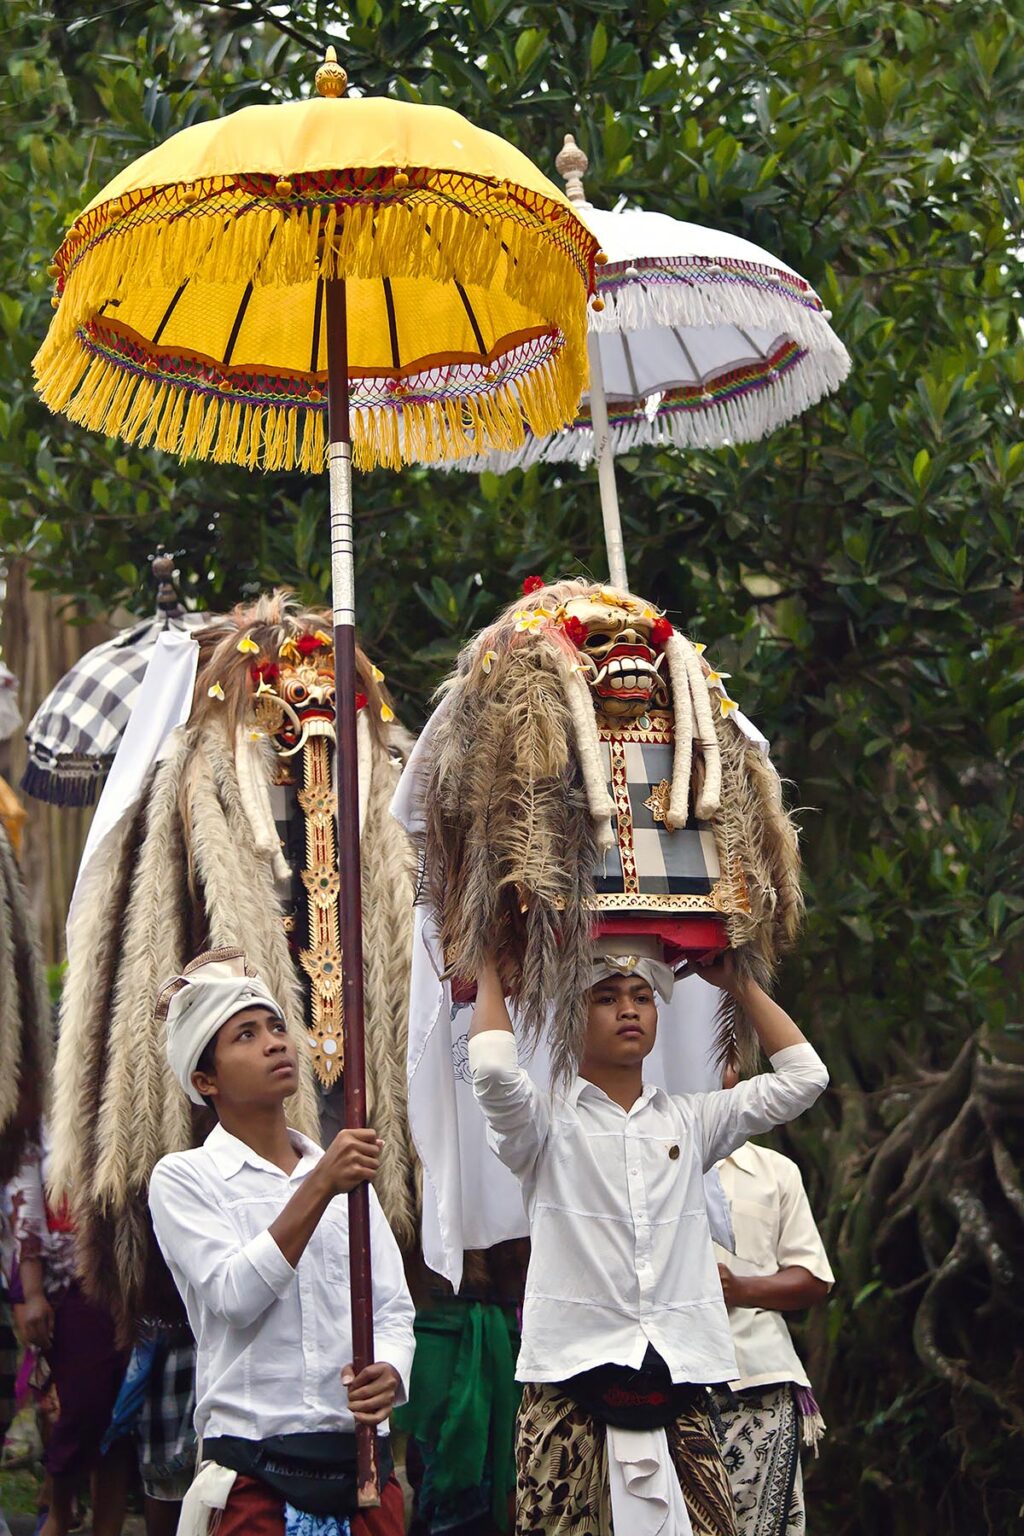 LION MASKS used in traditional LEGONG dancing are carried during a HINDU PROCESSION for a temple anniversary - UBUD, BALI